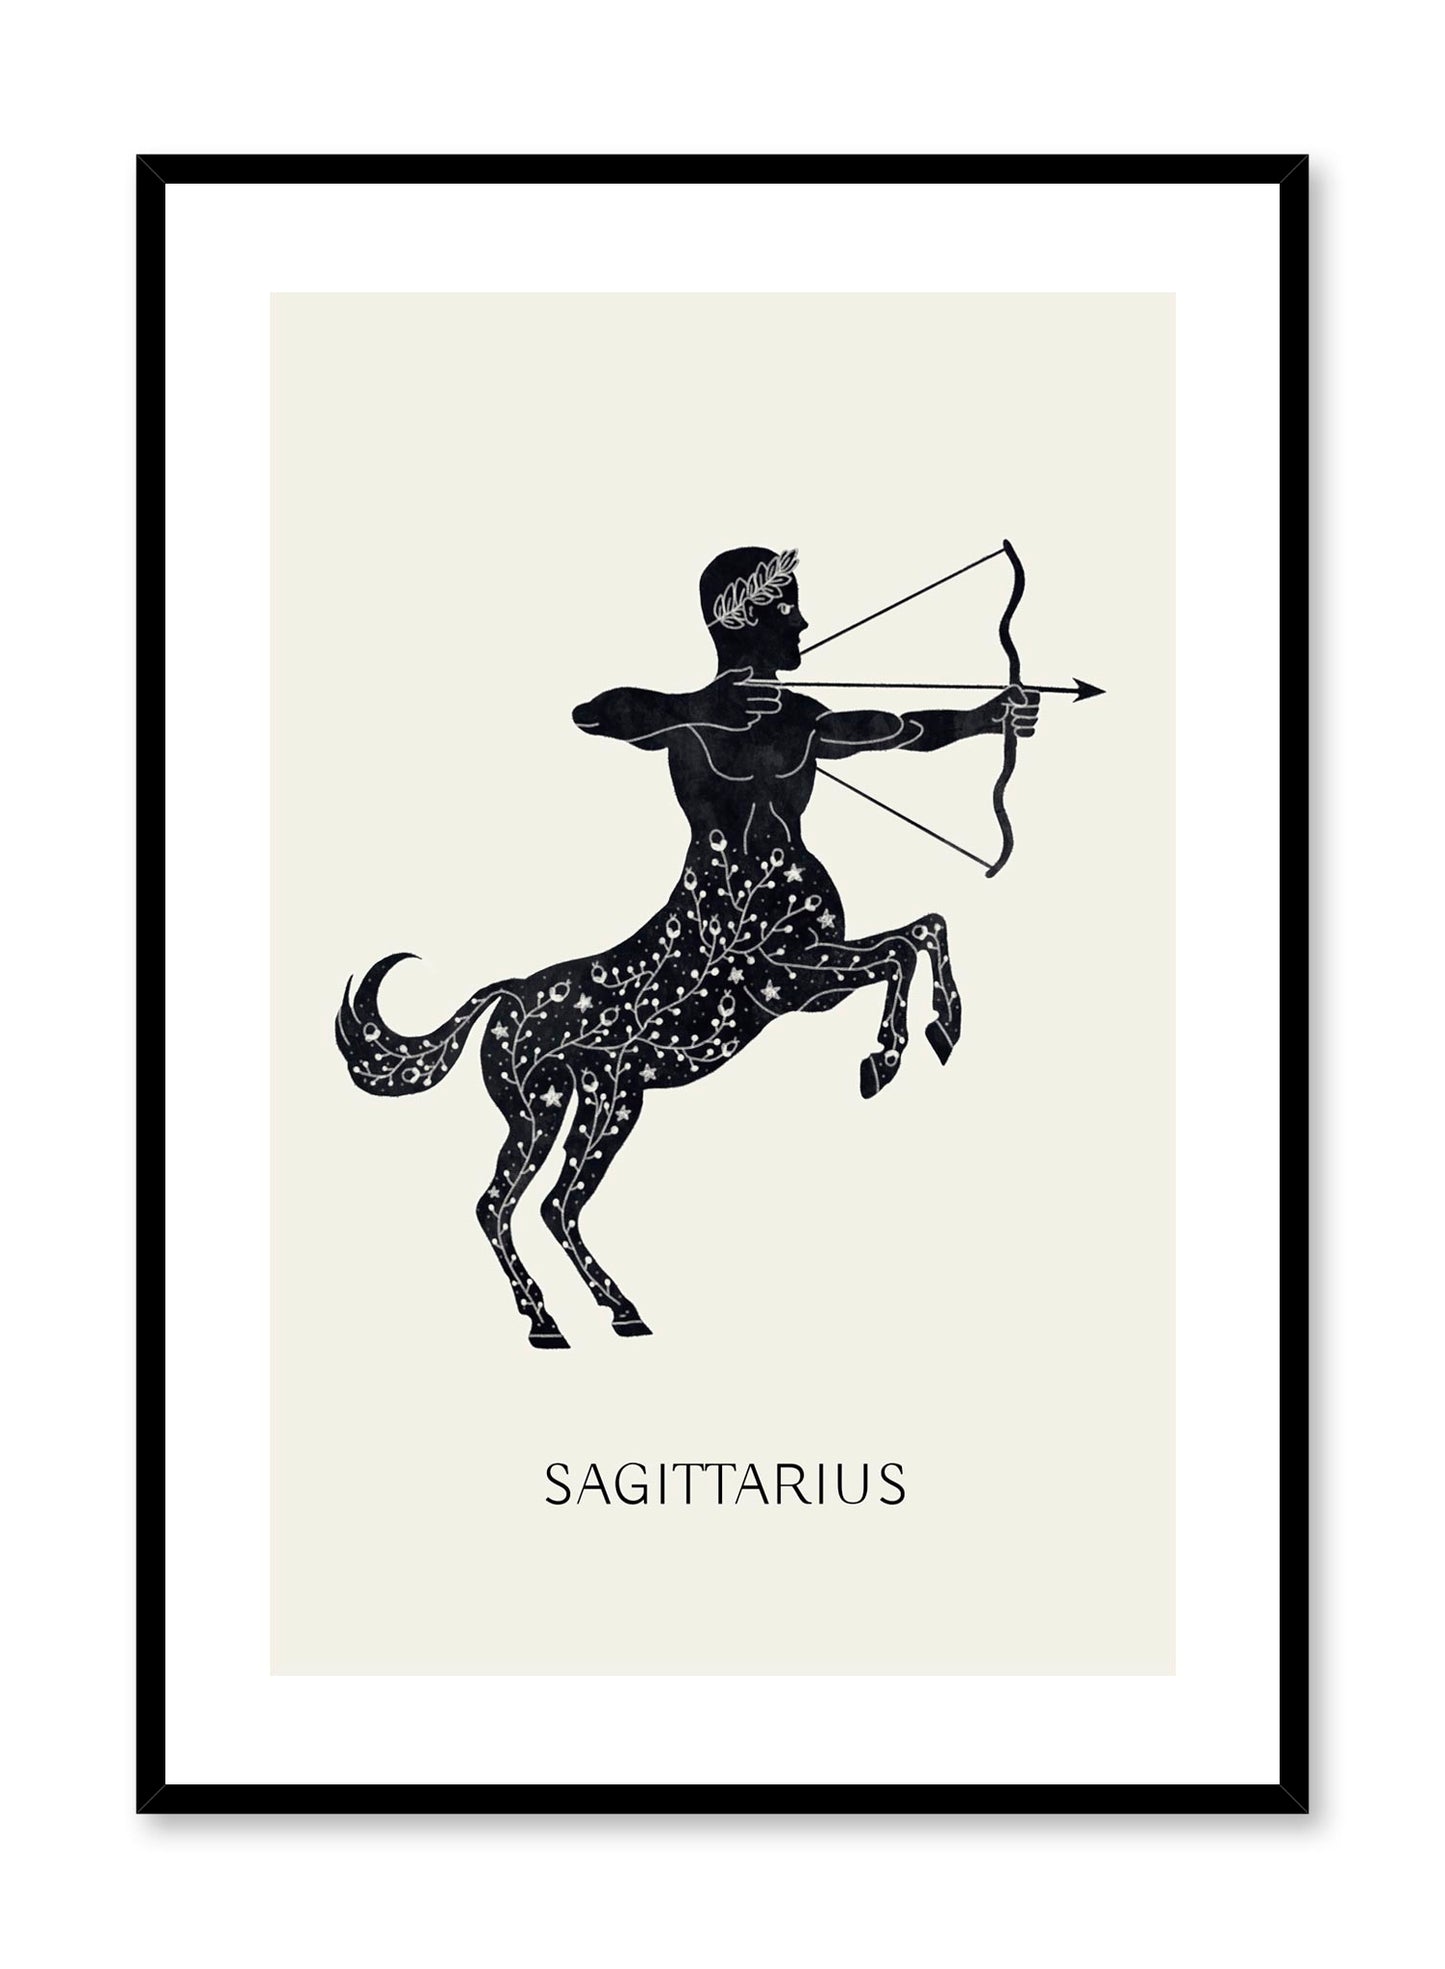 Celestial illustration poster by Opposite Wall with Sagittarius drawing